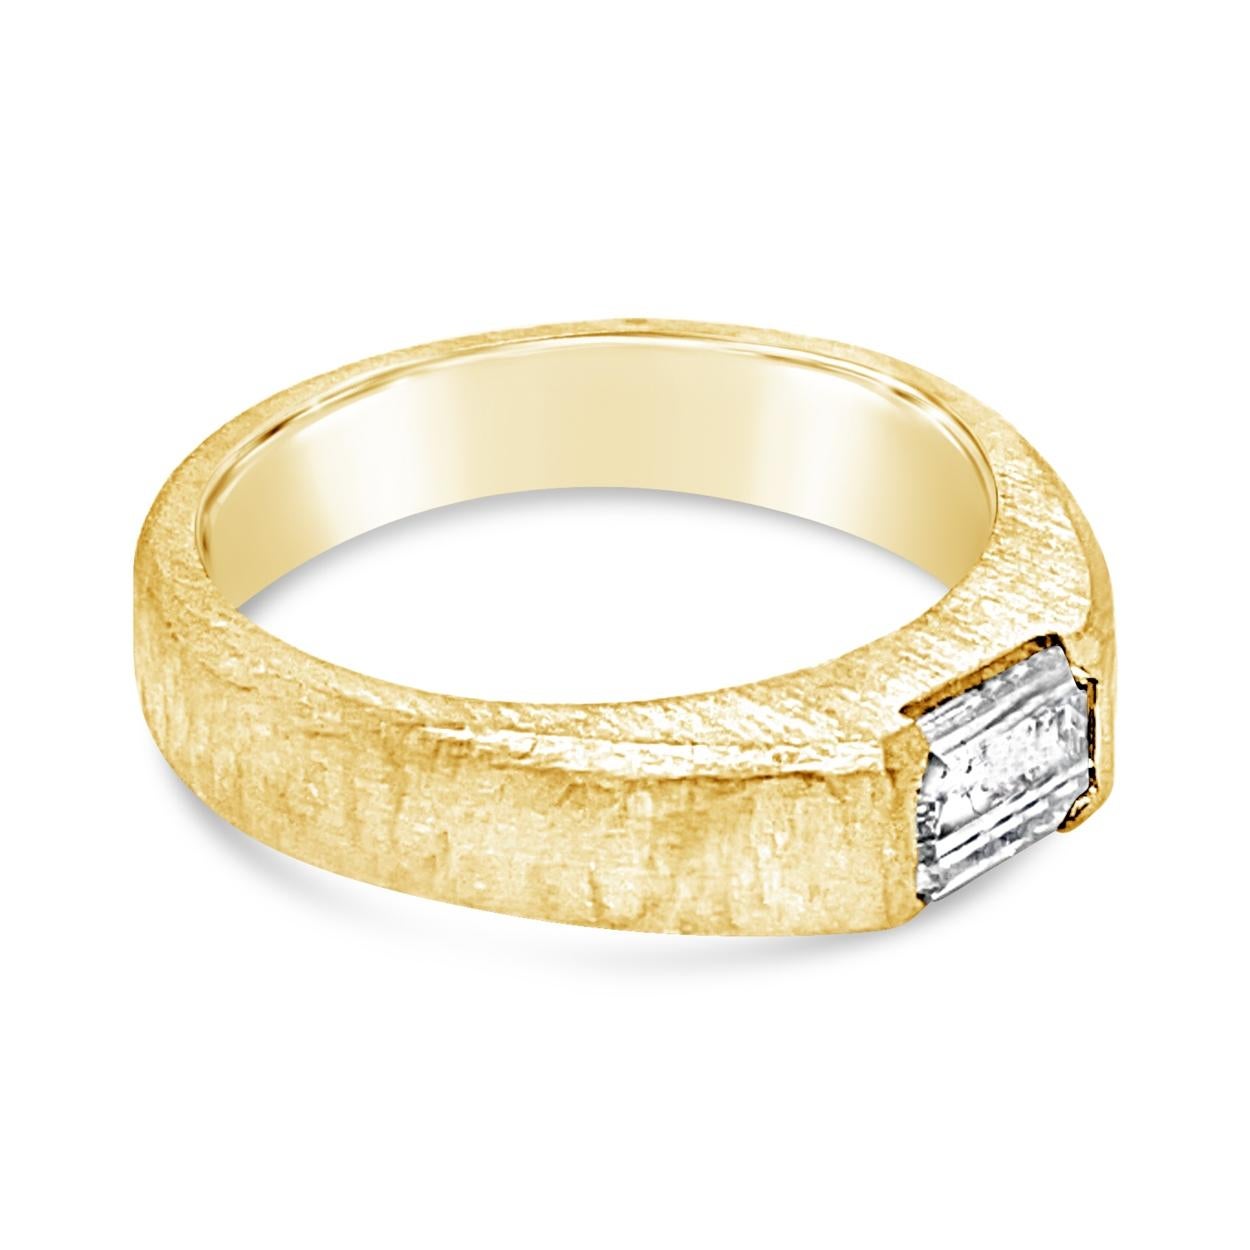 This Hand hammered Solitaire Ring is made in 18K Yellow Gold and hosts an EGL certified  1.02 Ct Emerald Cut natural diamond channel set in its center.
Center stone: 1.02 Ct Emerald cut diamond
Dimension: 7.13x4.73x3.33